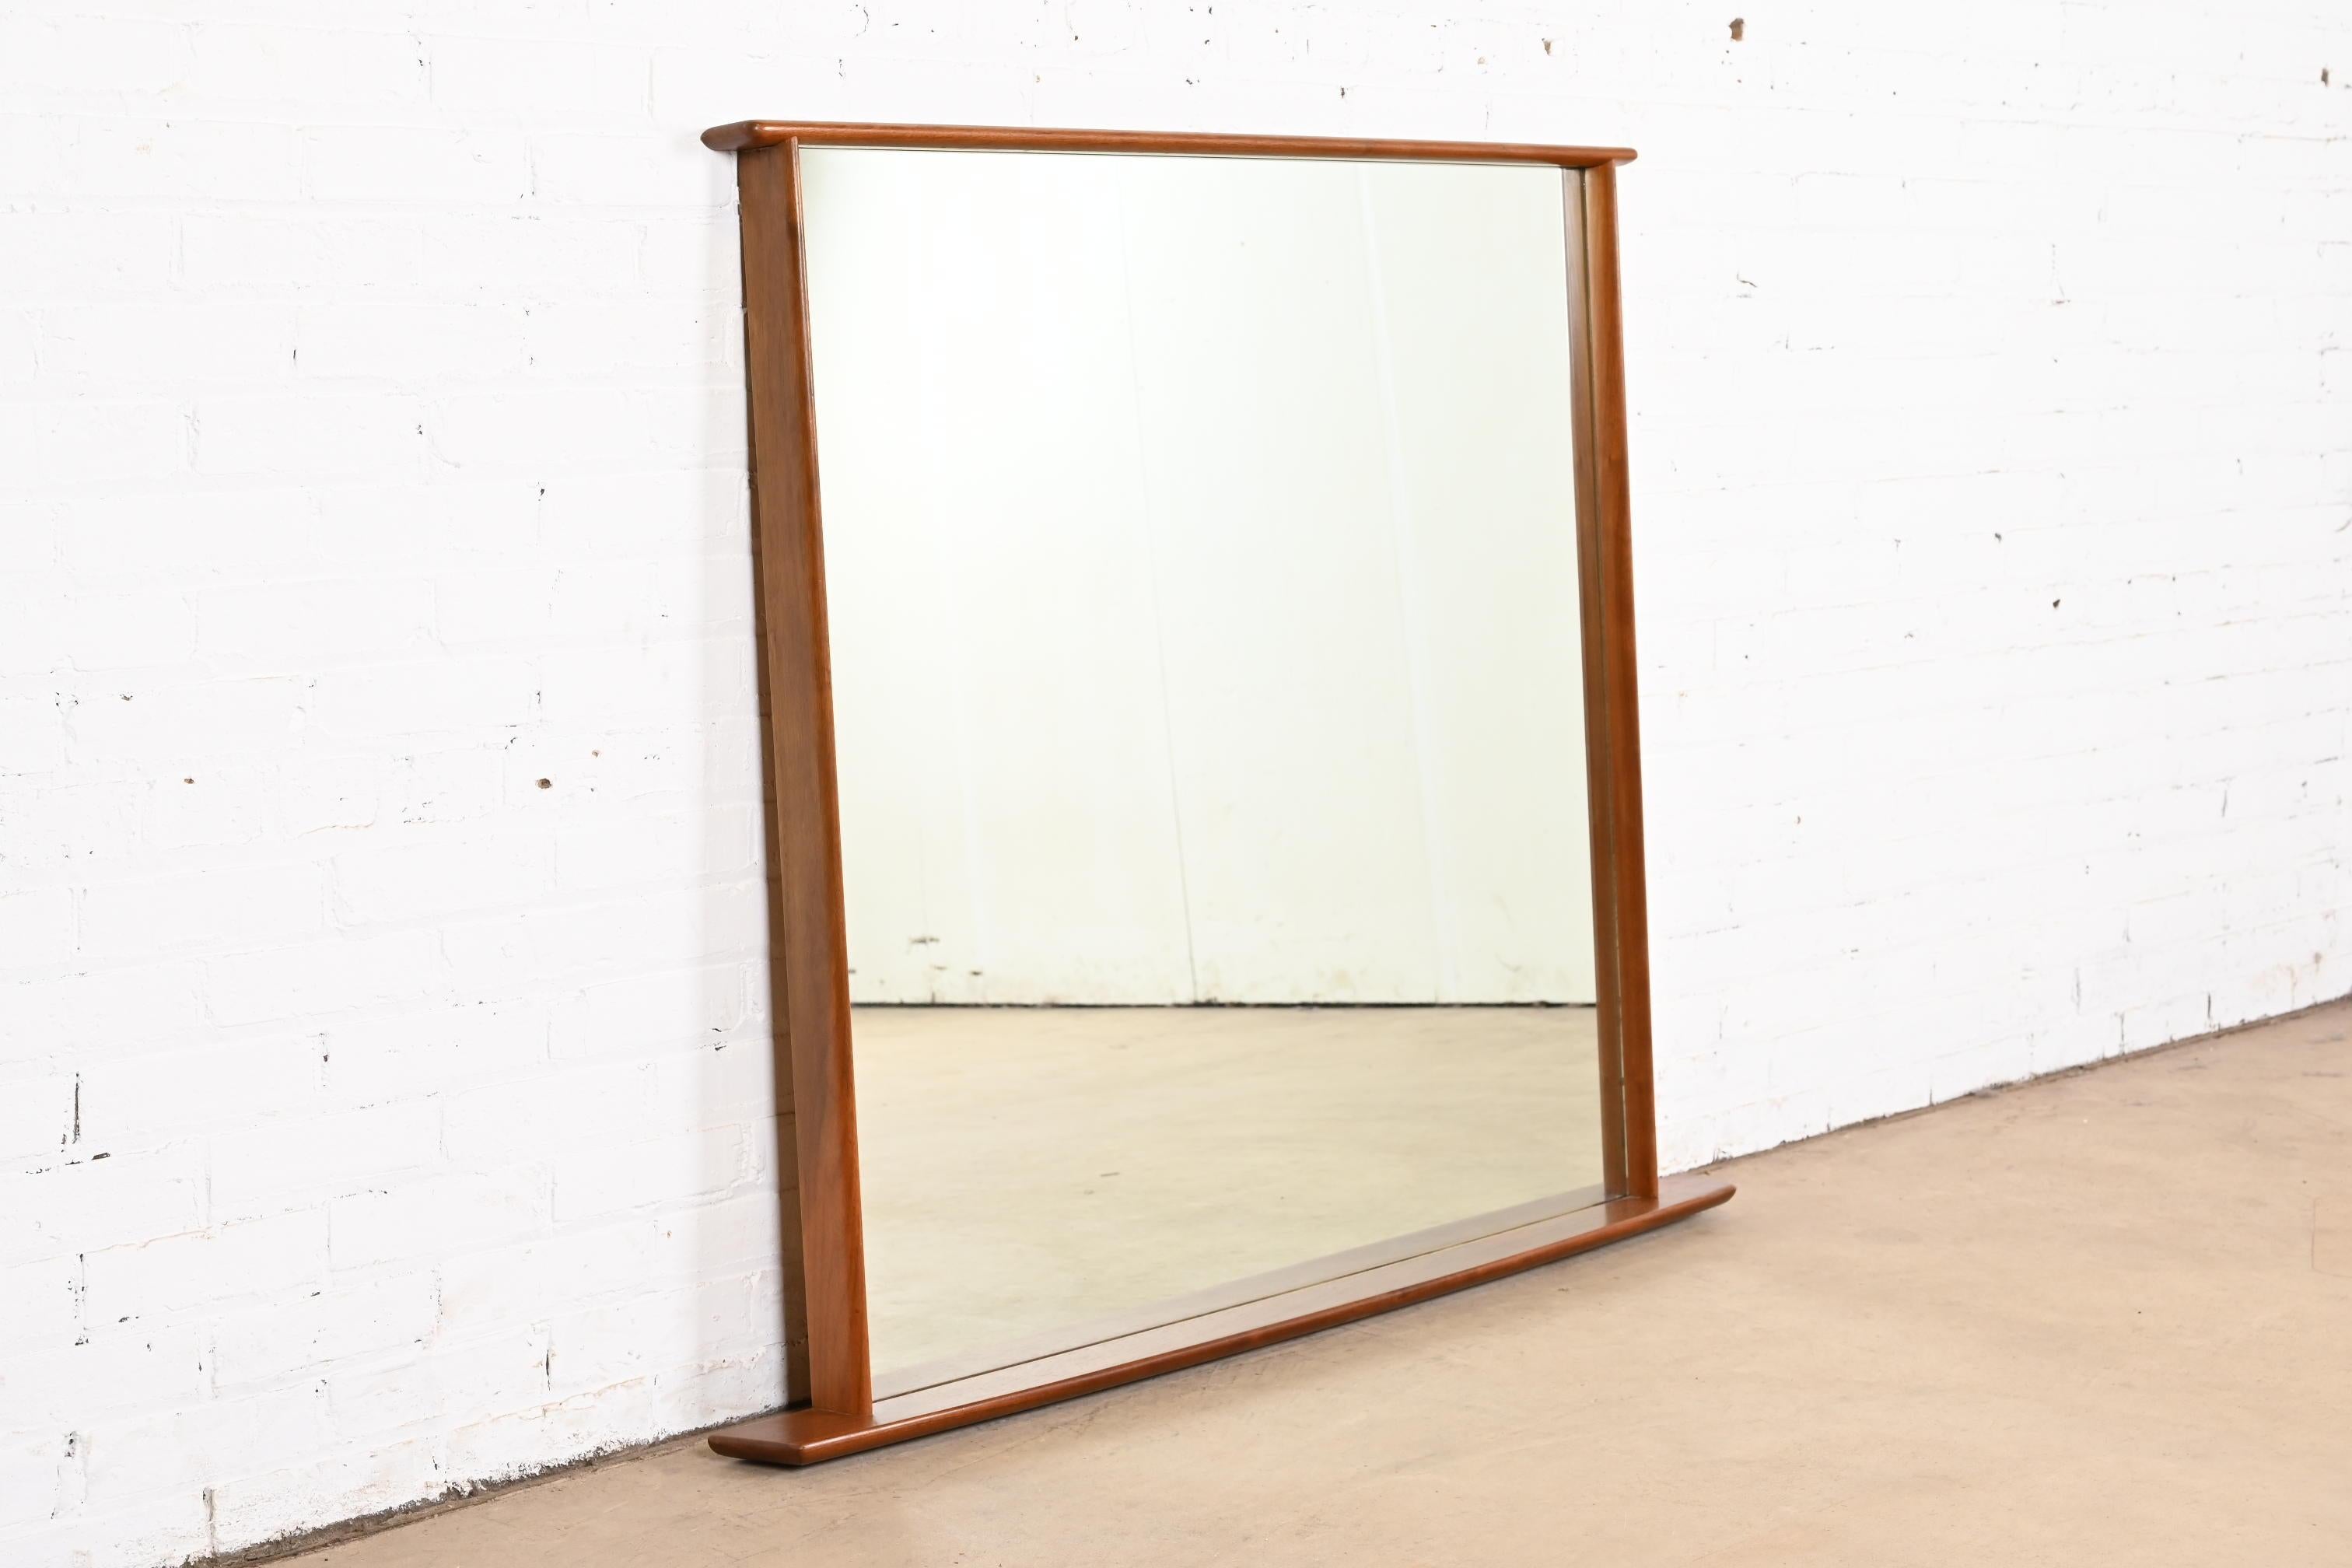 A very rare and exceptional mid-century Organic Modern sculpted walnut framed monumental wall mirror

By George Nakashima for Widdicomb Furniture, 